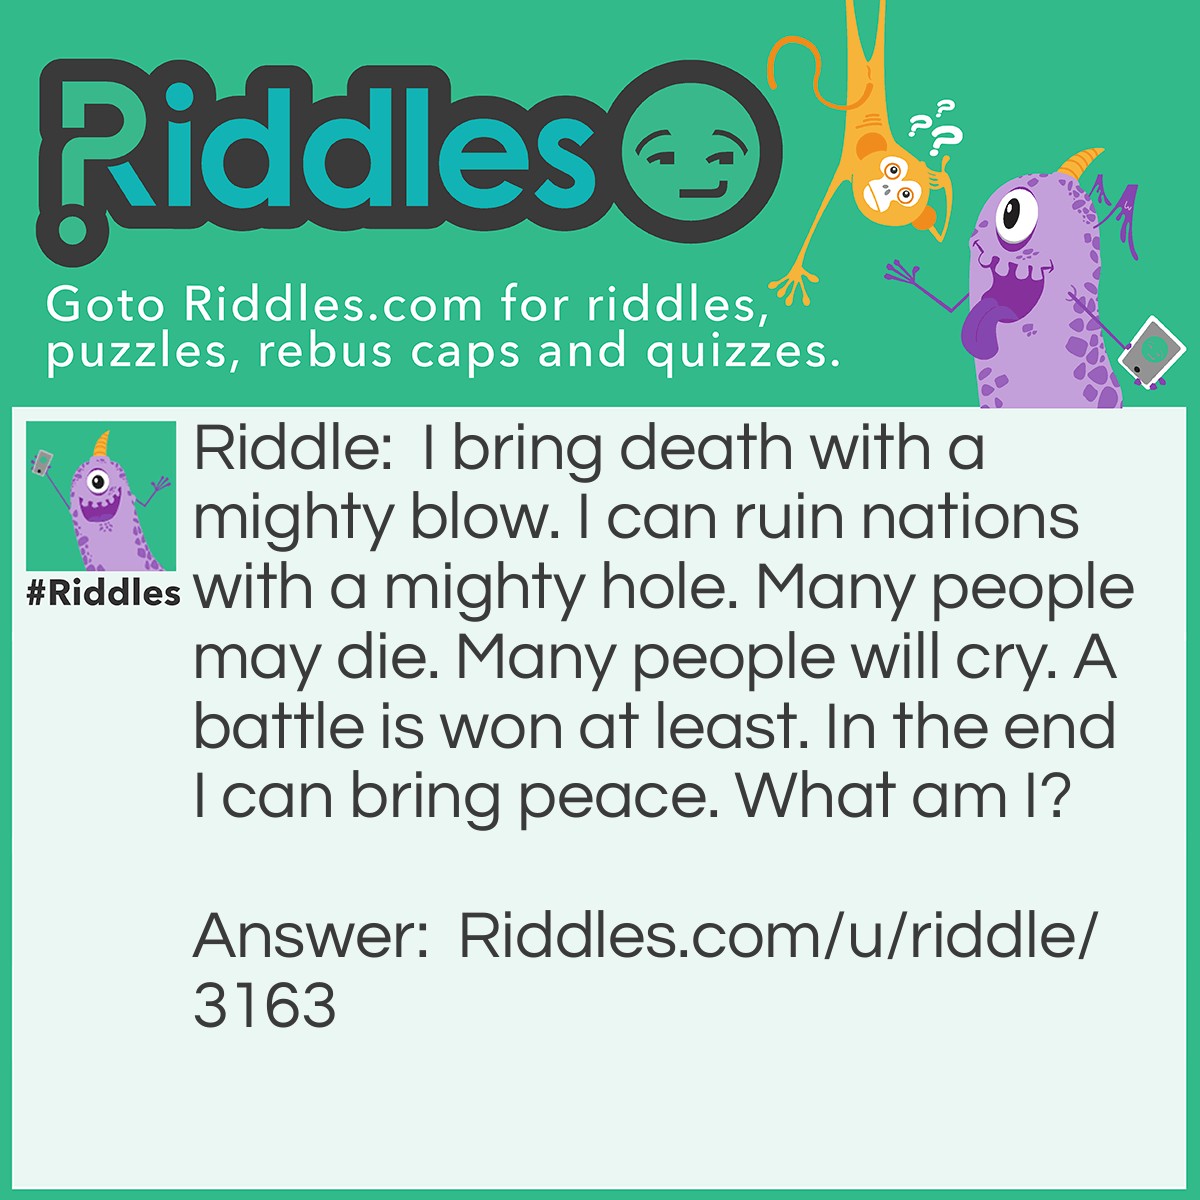 Riddle: I bring death with a mighty blow. I can ruin nations with a mighty hole. Many people may die. Many people will cry. A battle is won at least. In the end I can bring peace. What am I? Answer: War.